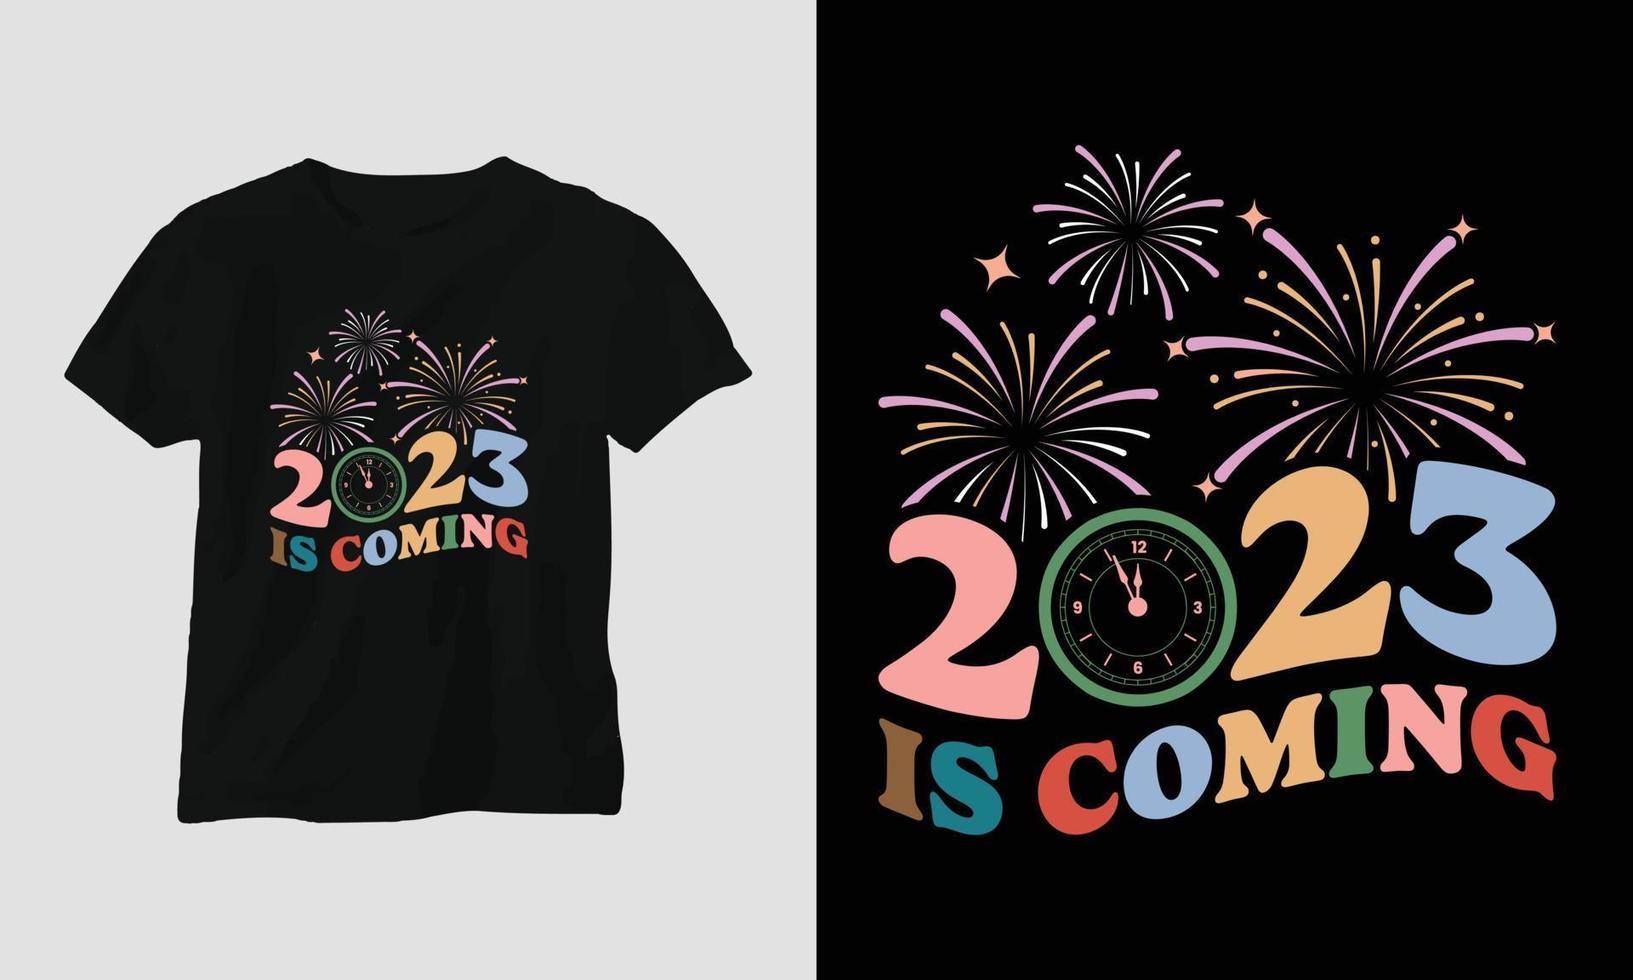 2023 is coming- Groovy New year 2023 T-shirt and apparel design vector